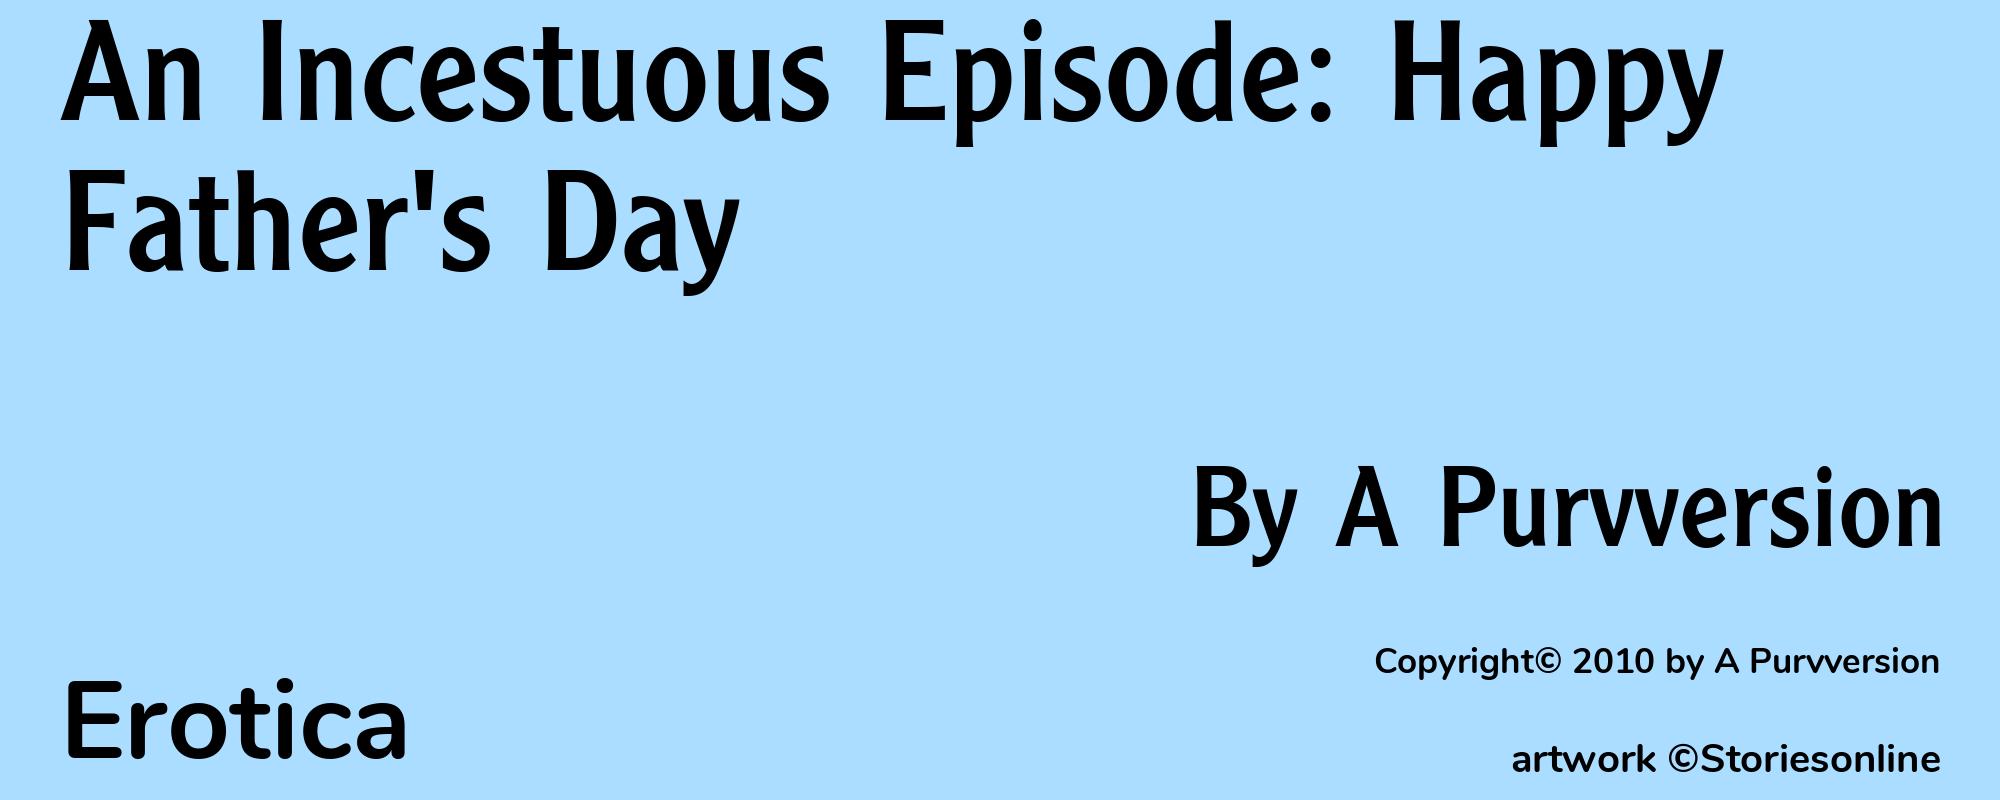 An Incestuous Episode: Happy Father's Day - Cover